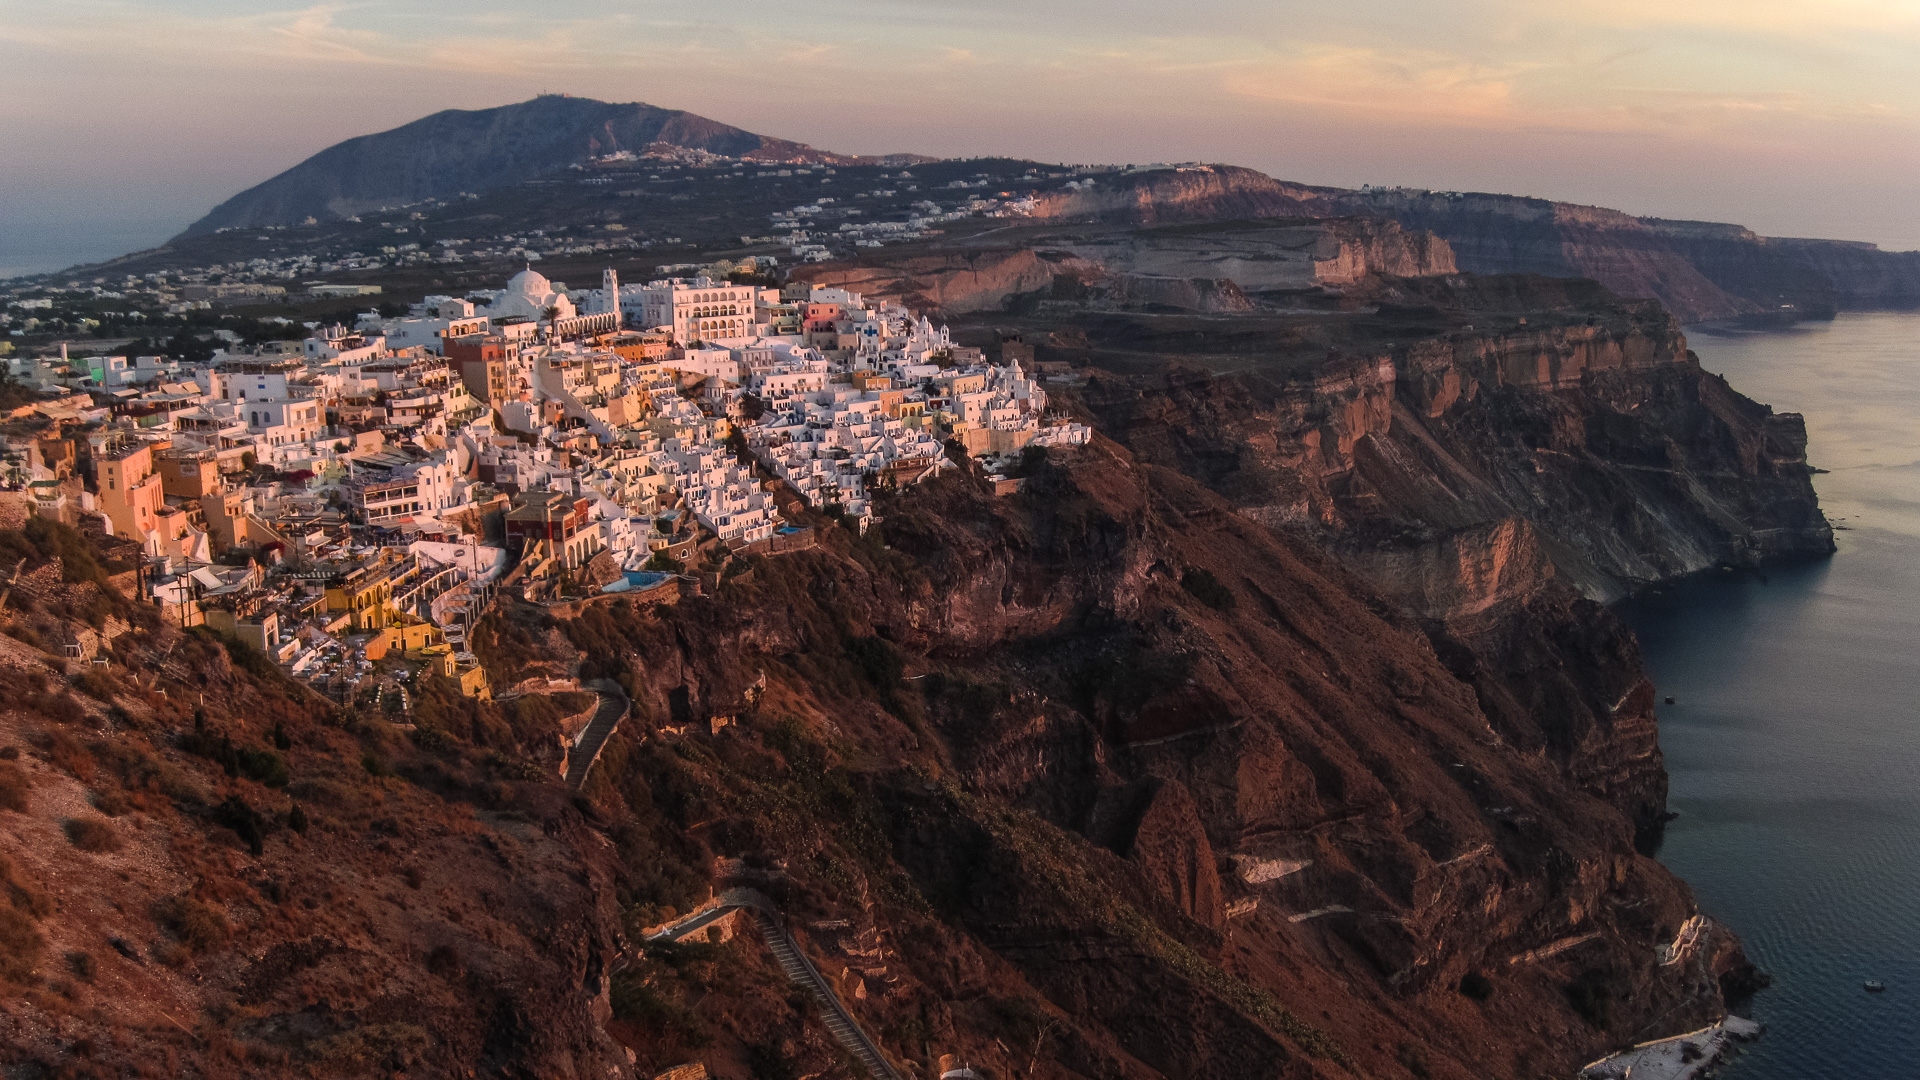 The town of Fira, overlooking the caldera. Each layer in the cliffs is the deposit from a different eruption of Santorini. (Source: Gareth Fabbro/Earth Observatory of Singapore)